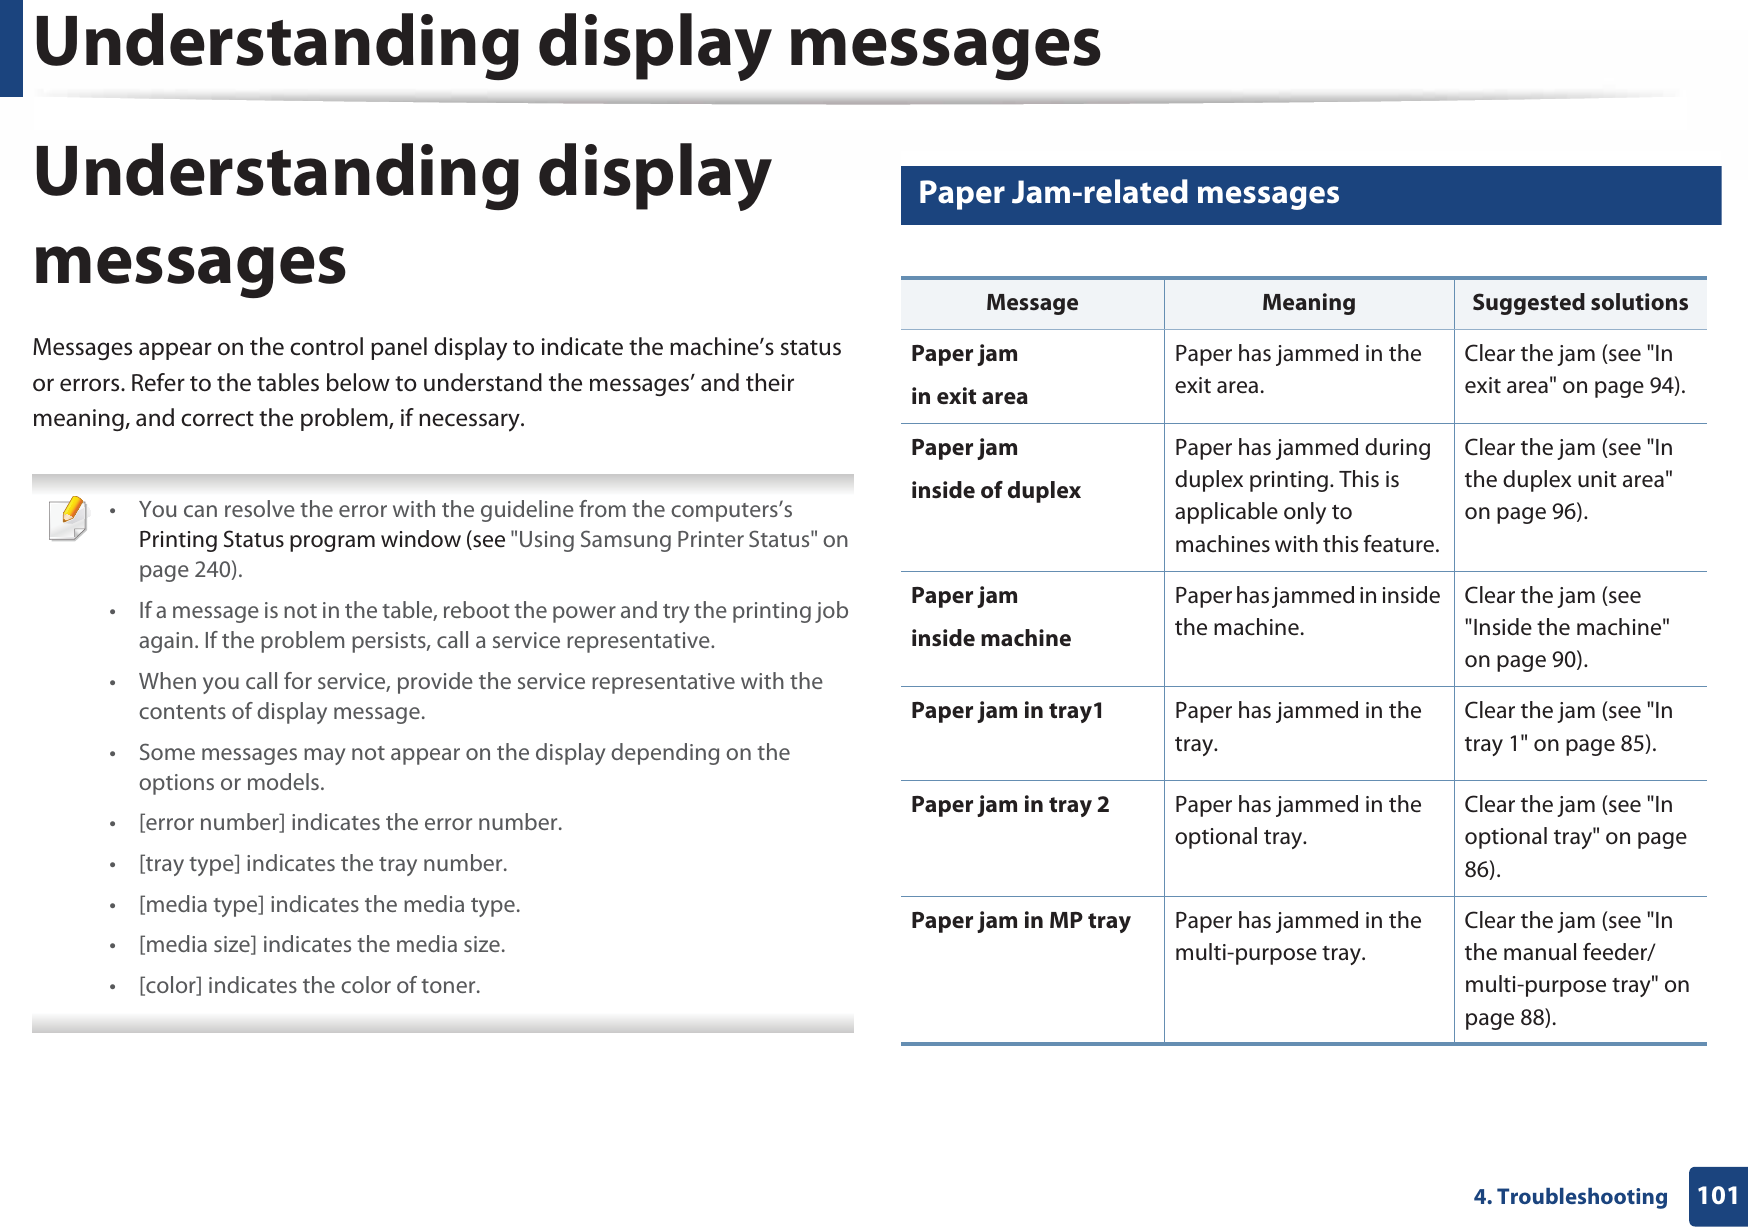 Understanding display messages1014. TroubleshootingUnderstanding display messagesMessages appear on the control panel display to indicate the machine’s status or errors. Refer to the tables below to understand the messages’ and their meaning, and correct the problem, if necessary. • You can resolve the error with the guideline from the computers’s Printing Status program window (see &quot;Using Samsung Printer Status&quot; on page 240).• If a message is not in the table, reboot the power and try the printing job again. If the problem persists, call a service representative.• When you call for service, provide the service representative with the contents of display message.• Some messages may not appear on the display depending on the options or models.• [error number] indicates the error number. • [tray type] indicates the tray number. • [media type] indicates the media type.• [media size] indicates the media size.• [color] indicates the color of toner. 7 Paper Jam-related messagesMessage Meaning Suggested solutionsPaper jam in exit areaPaper has jammed in the exit area.Clear the jam (see &quot;In exit area&quot; on page 94).Paper jam inside of duplexPaper has jammed during duplex printing. This is applicable only to machines with this feature. Clear the jam (see &quot;In the duplex unit area&quot; on page 96).Paper jaminside machinePaper has jammed in inside the machine.Clear the jam (see &quot;Inside the machine&quot; on page 90).Paper jam in tray1 Paper has jammed in the tray.Clear the jam (see &quot;In tray 1&quot; on page 85).Paper jam in tray 2 Paper has jammed in the optional tray.Clear the jam (see &quot;In optional tray&quot; on page 86).Paper jam in MP tray Paper has jammed in the multi-purpose tray.Clear the jam (see &quot;In the manual feeder/multi-purpose tray&quot; on page 88).